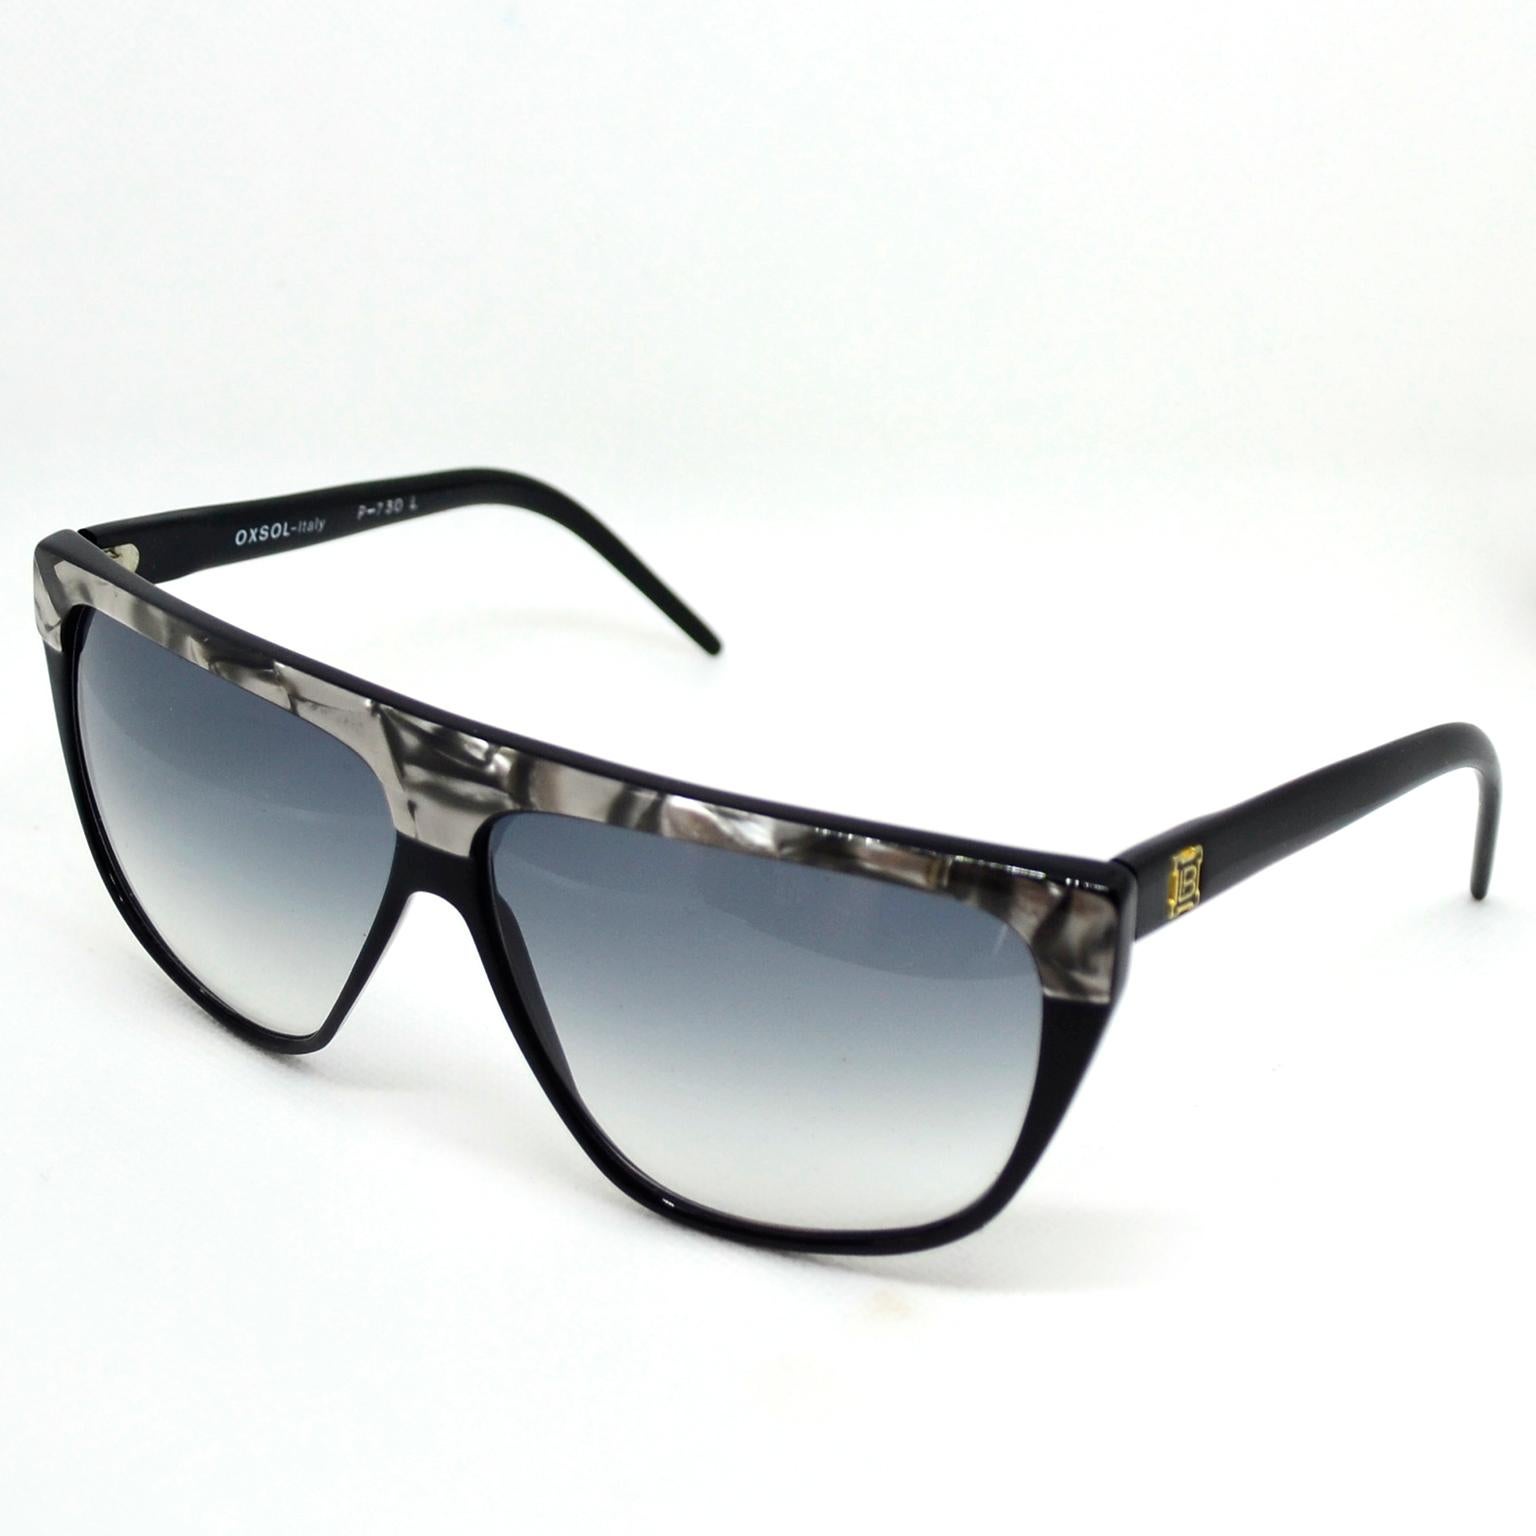 Laura Biagiotti Black and Silver Marbled Vintage Sunglasses 1